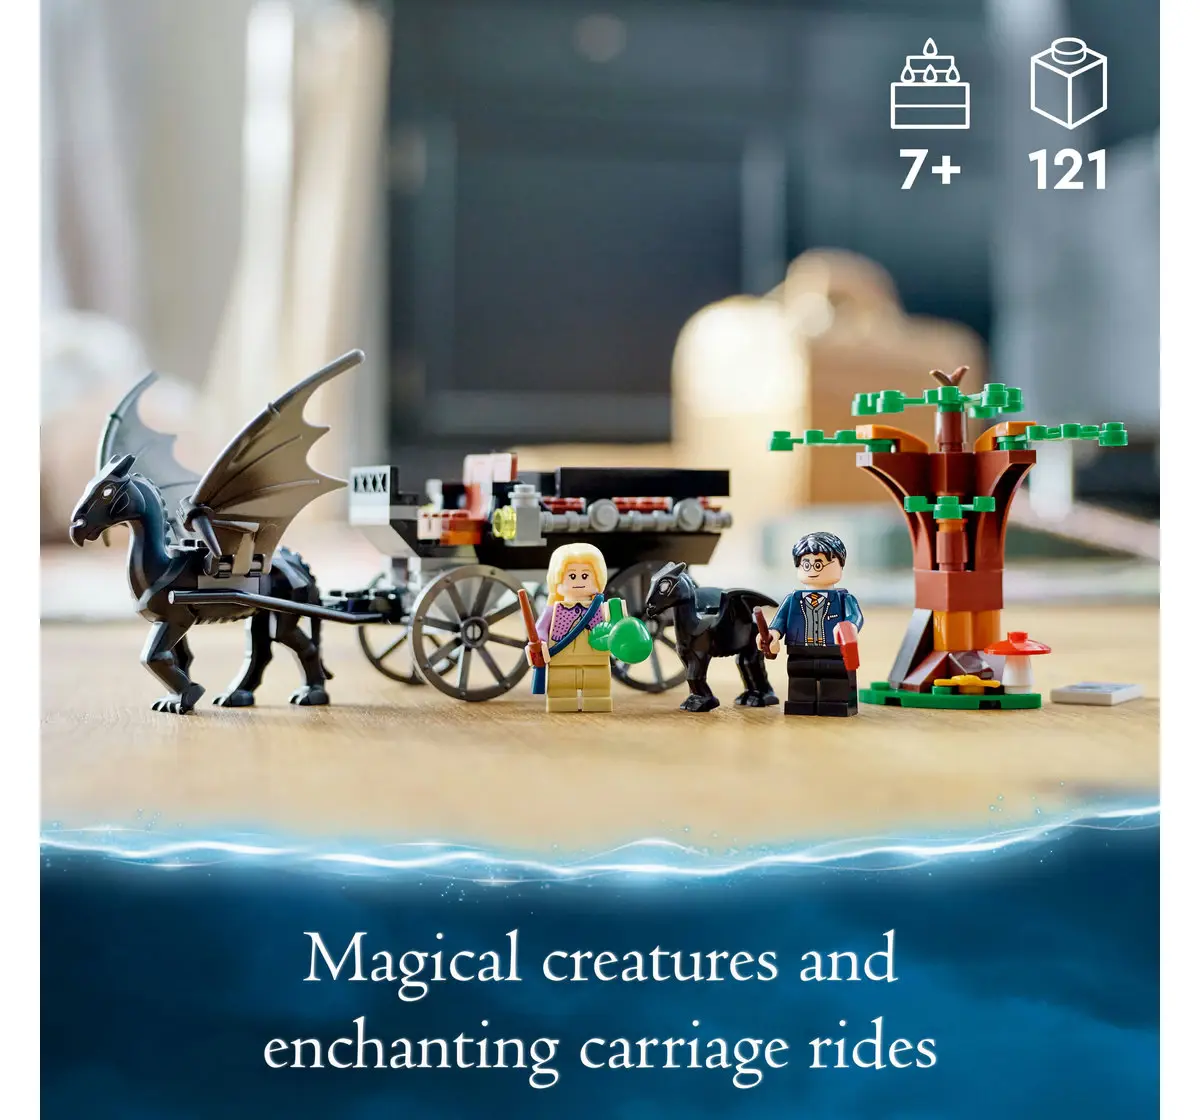 Lego Harry Potter Hogwarts Carriage And Thestrals 76400 Building Kit (121 Pieces)